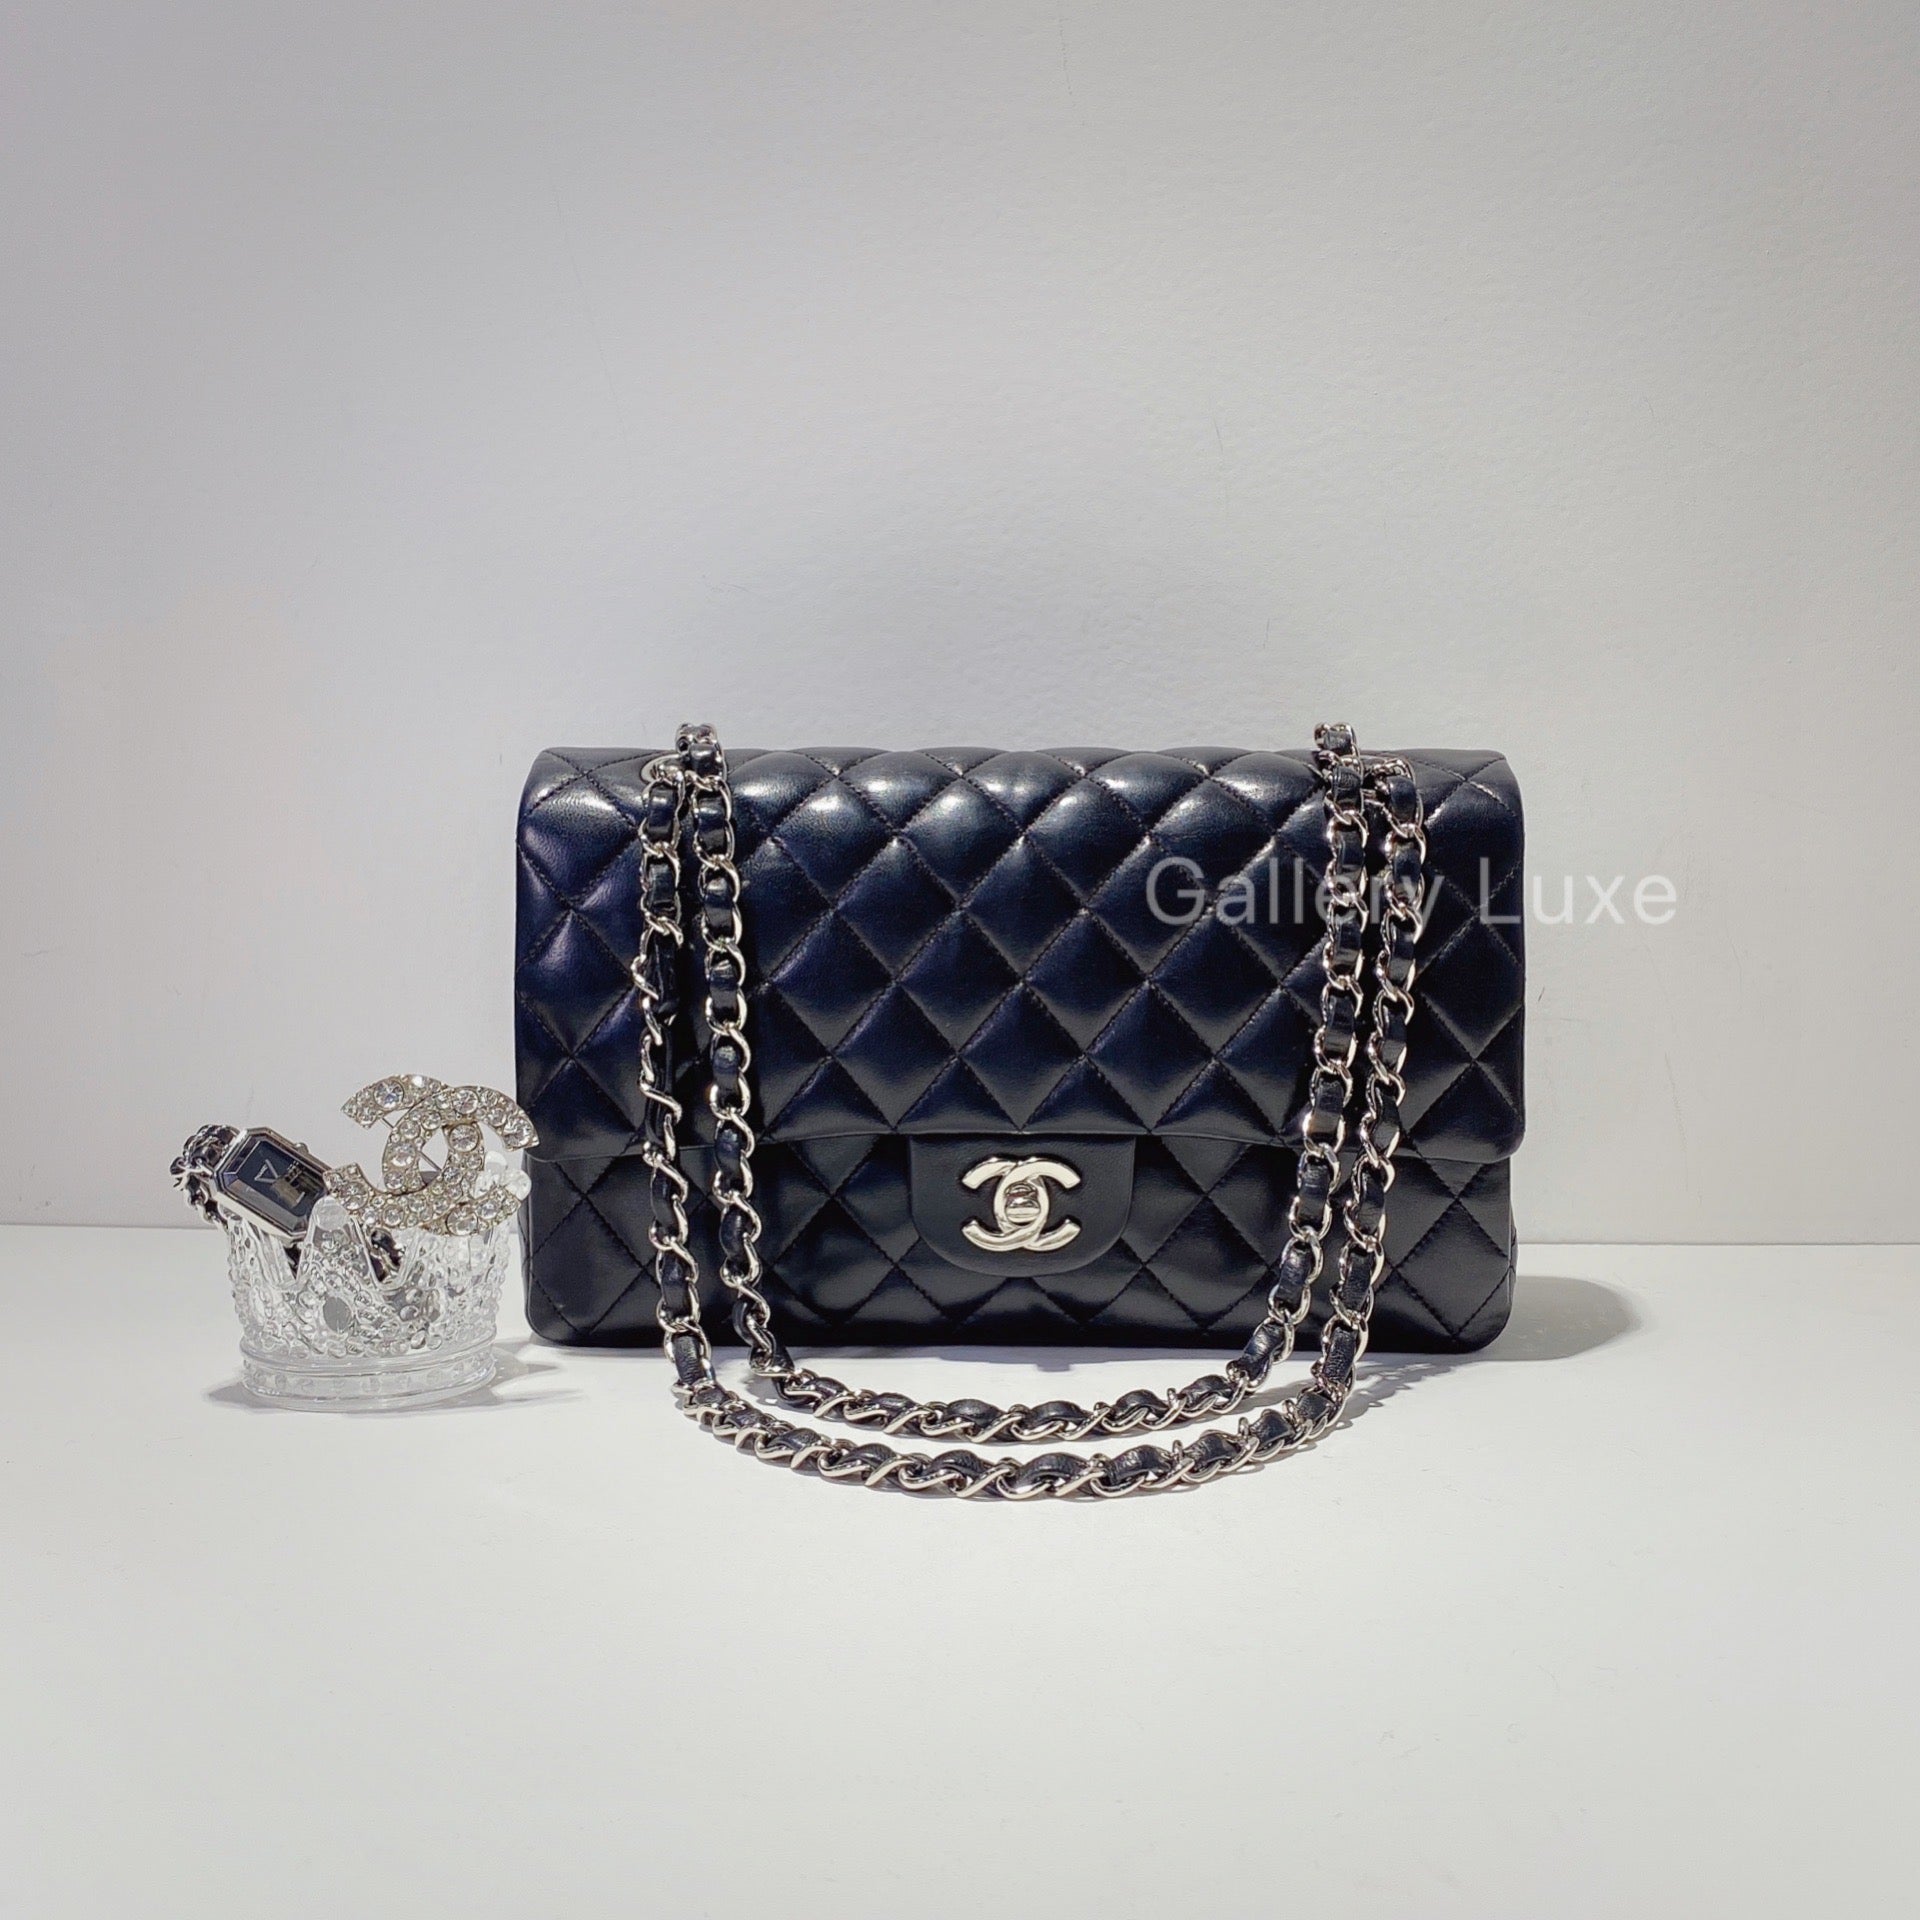 No.2216-Chanel Lambskin Classic Flap Bag 25cm – Gallery Luxe